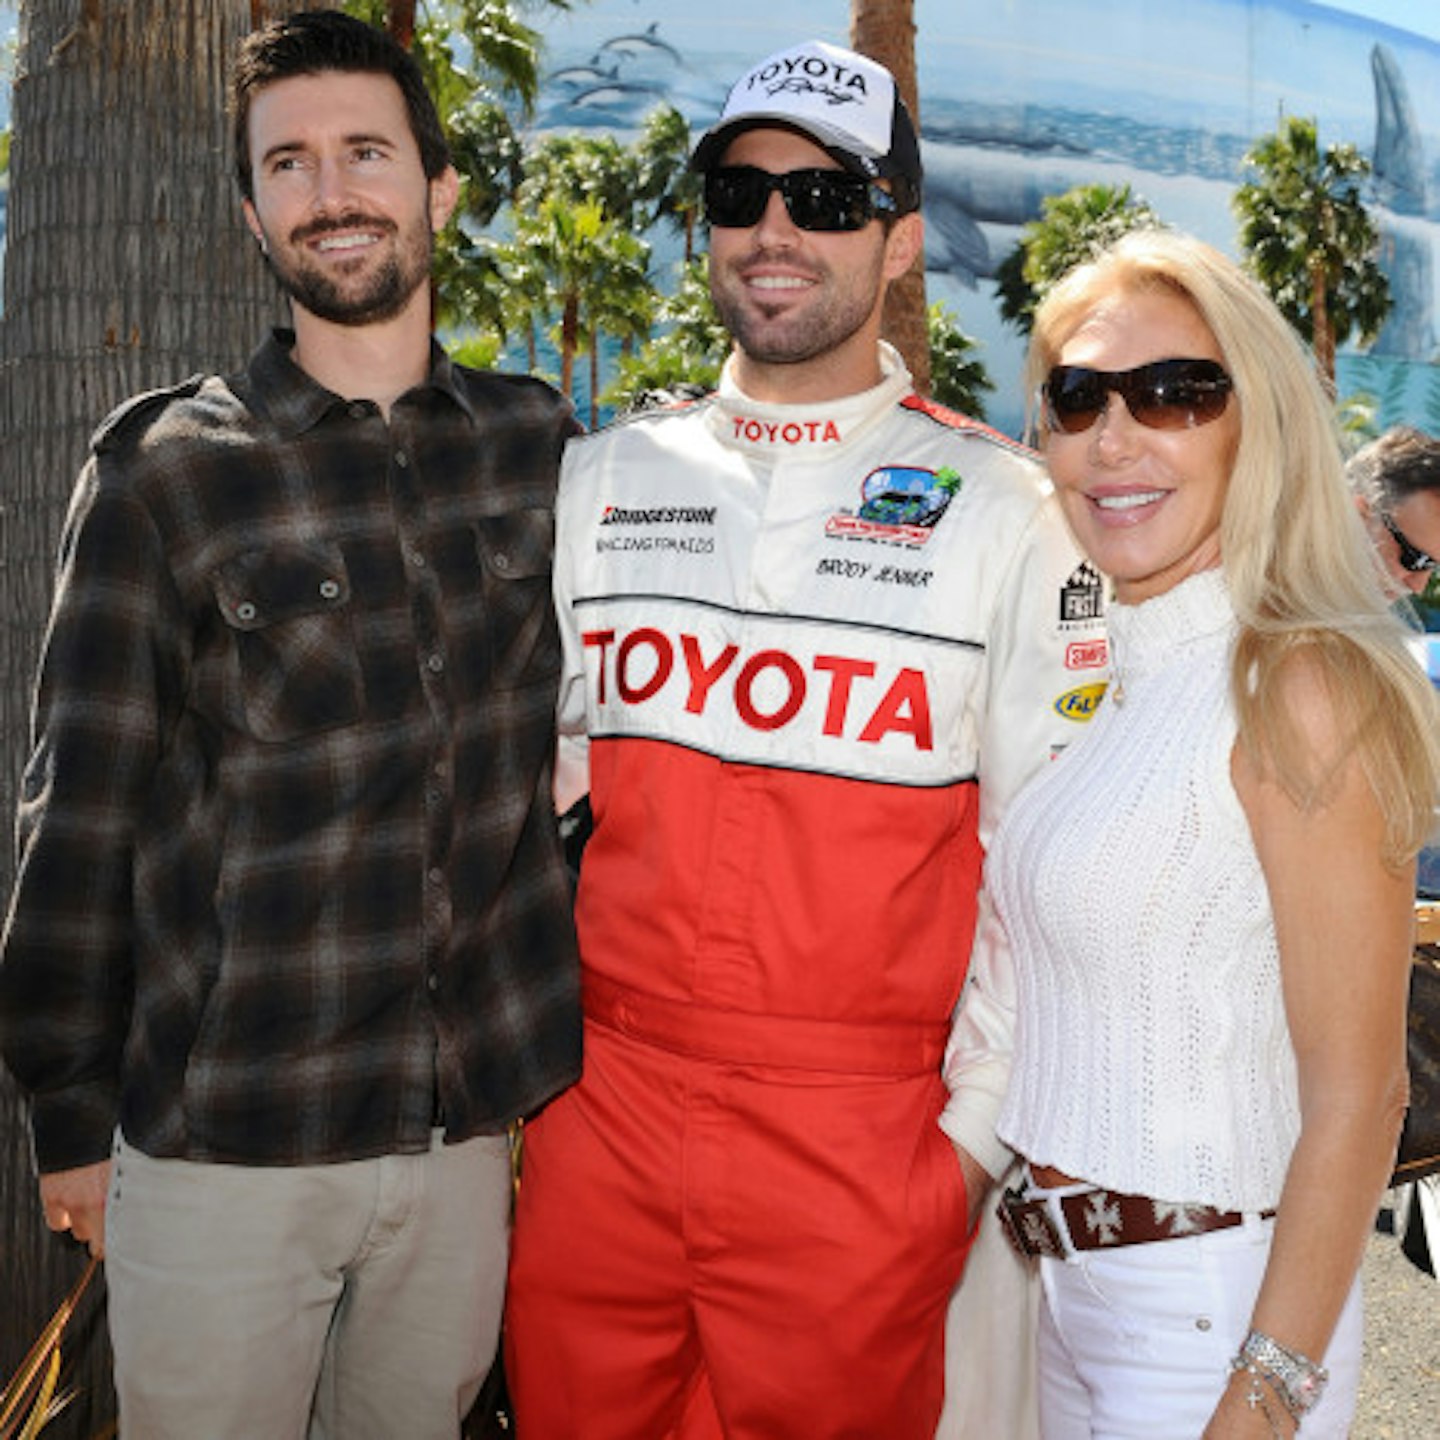 (Left to right) Brandon, Brody and their mother Linda Thompson